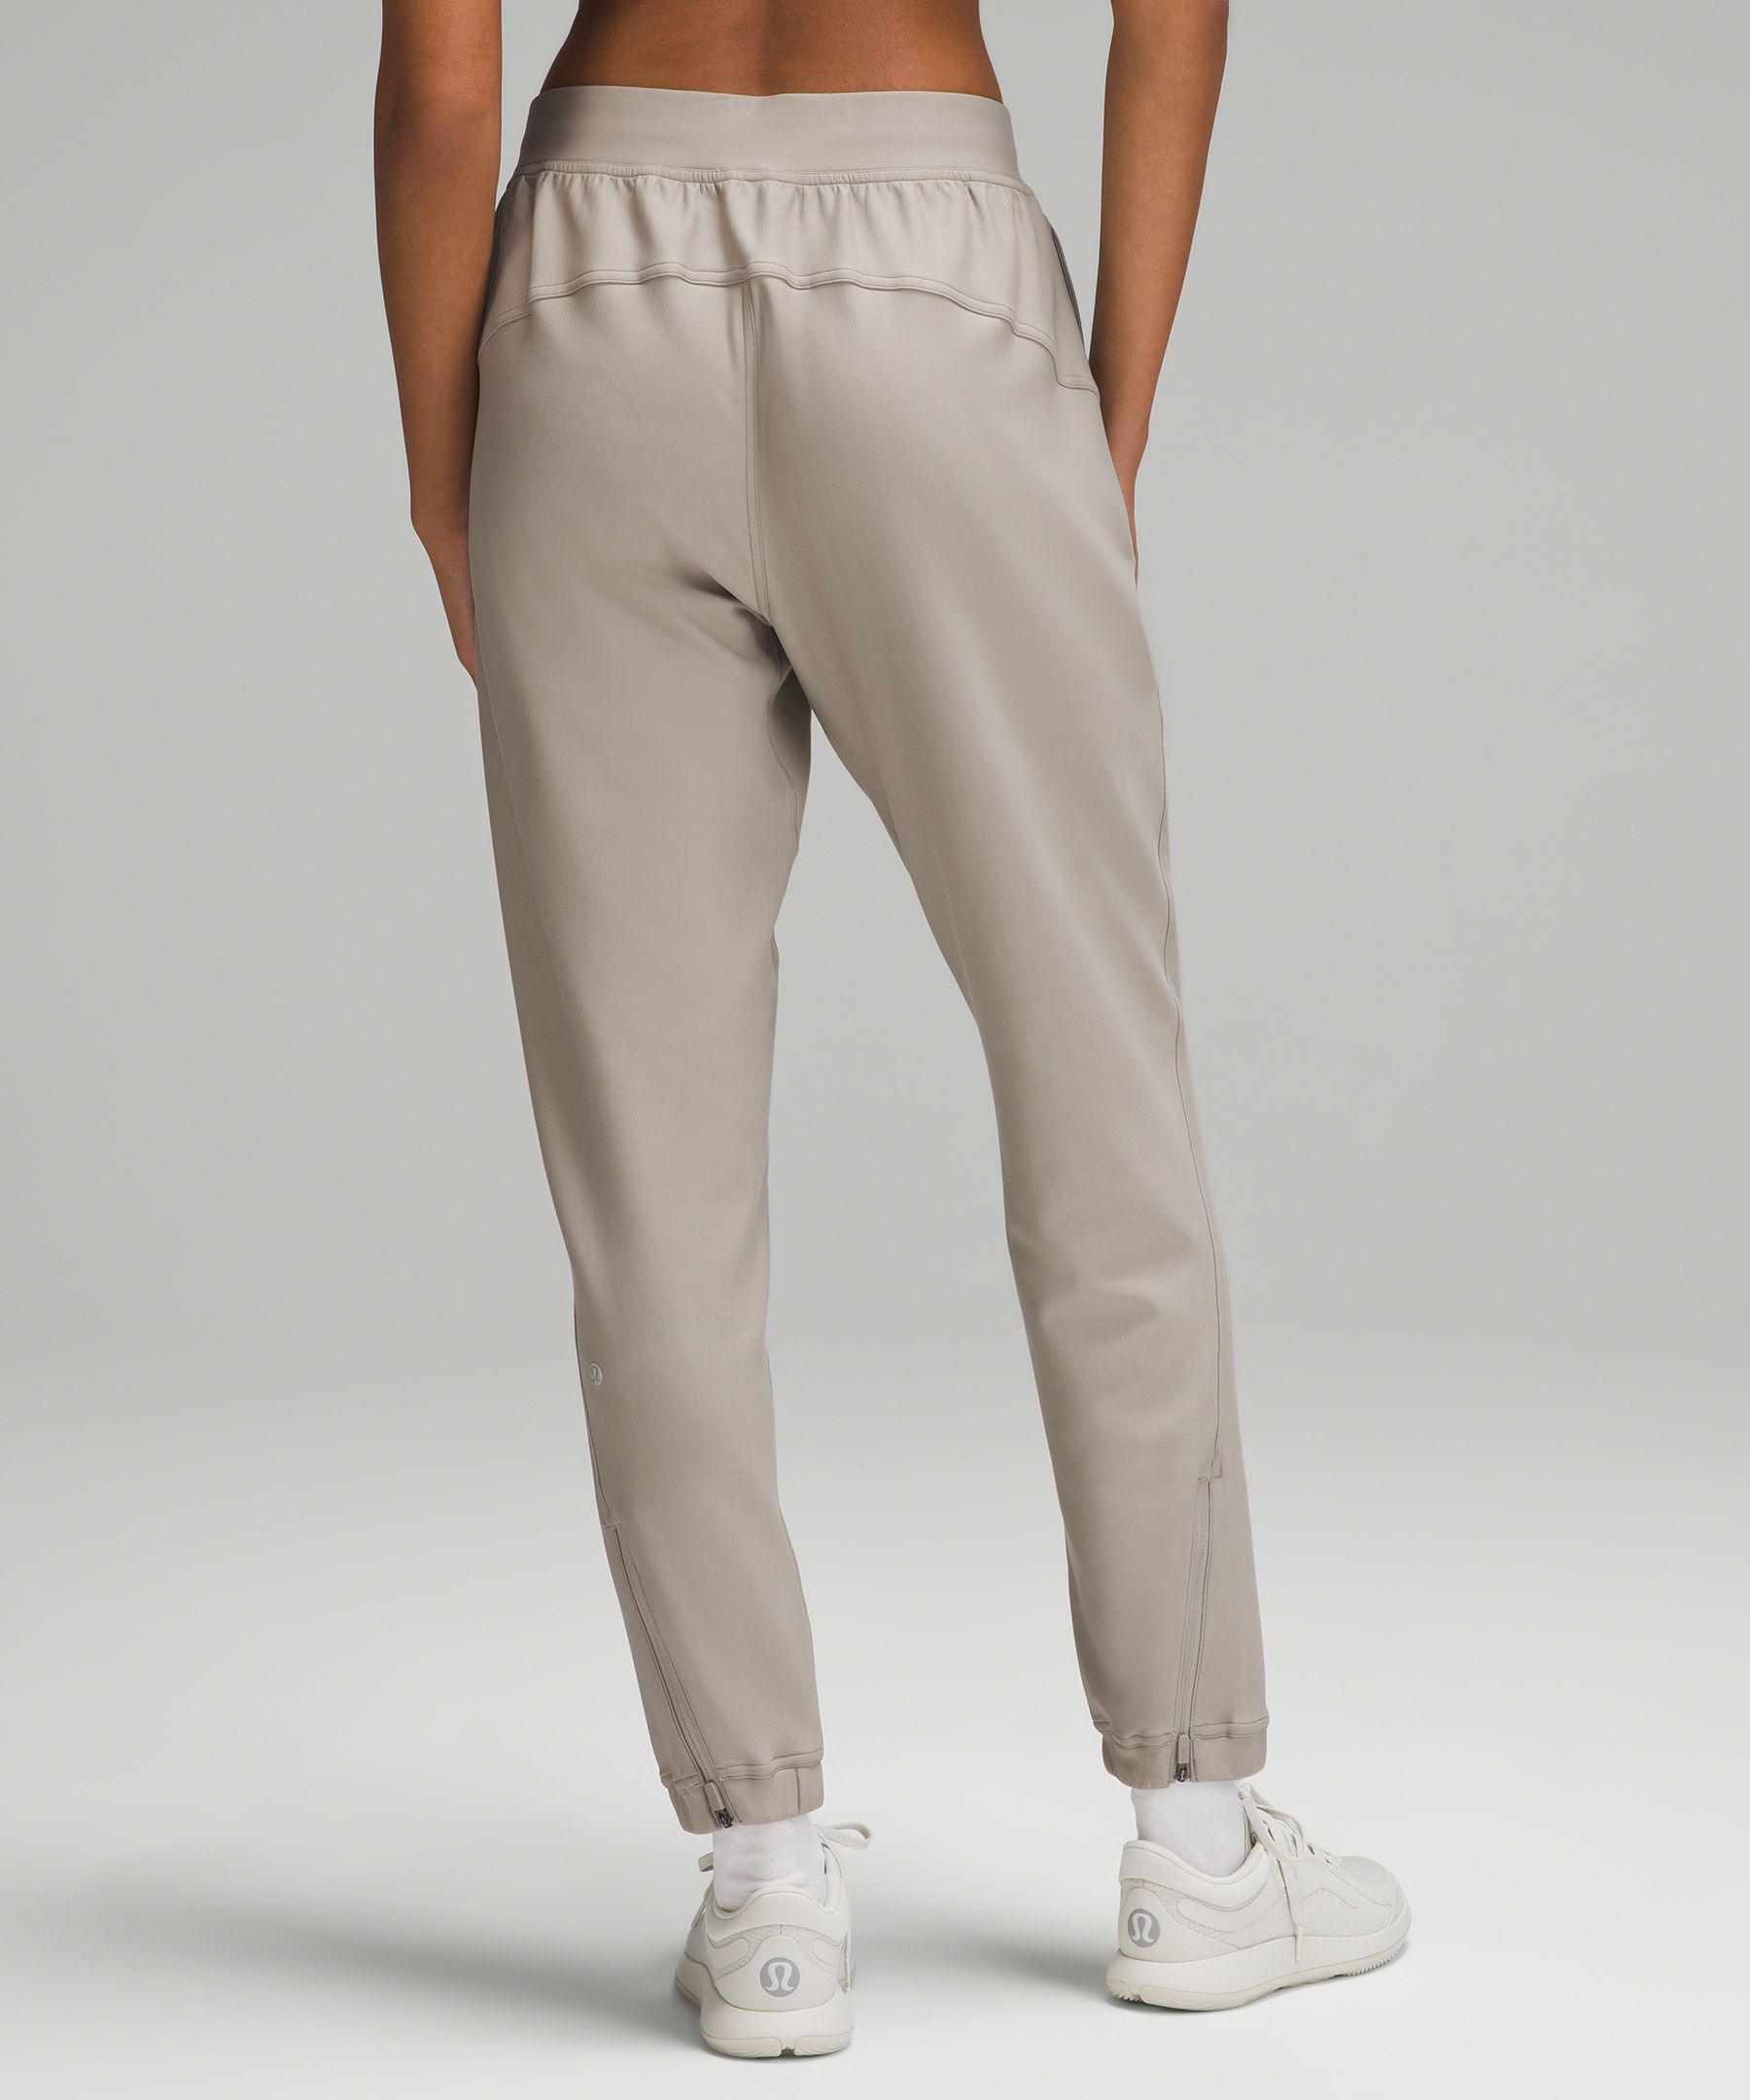 Adapted State High-Rise Fleece Jogger *Full Length, Women's Joggers